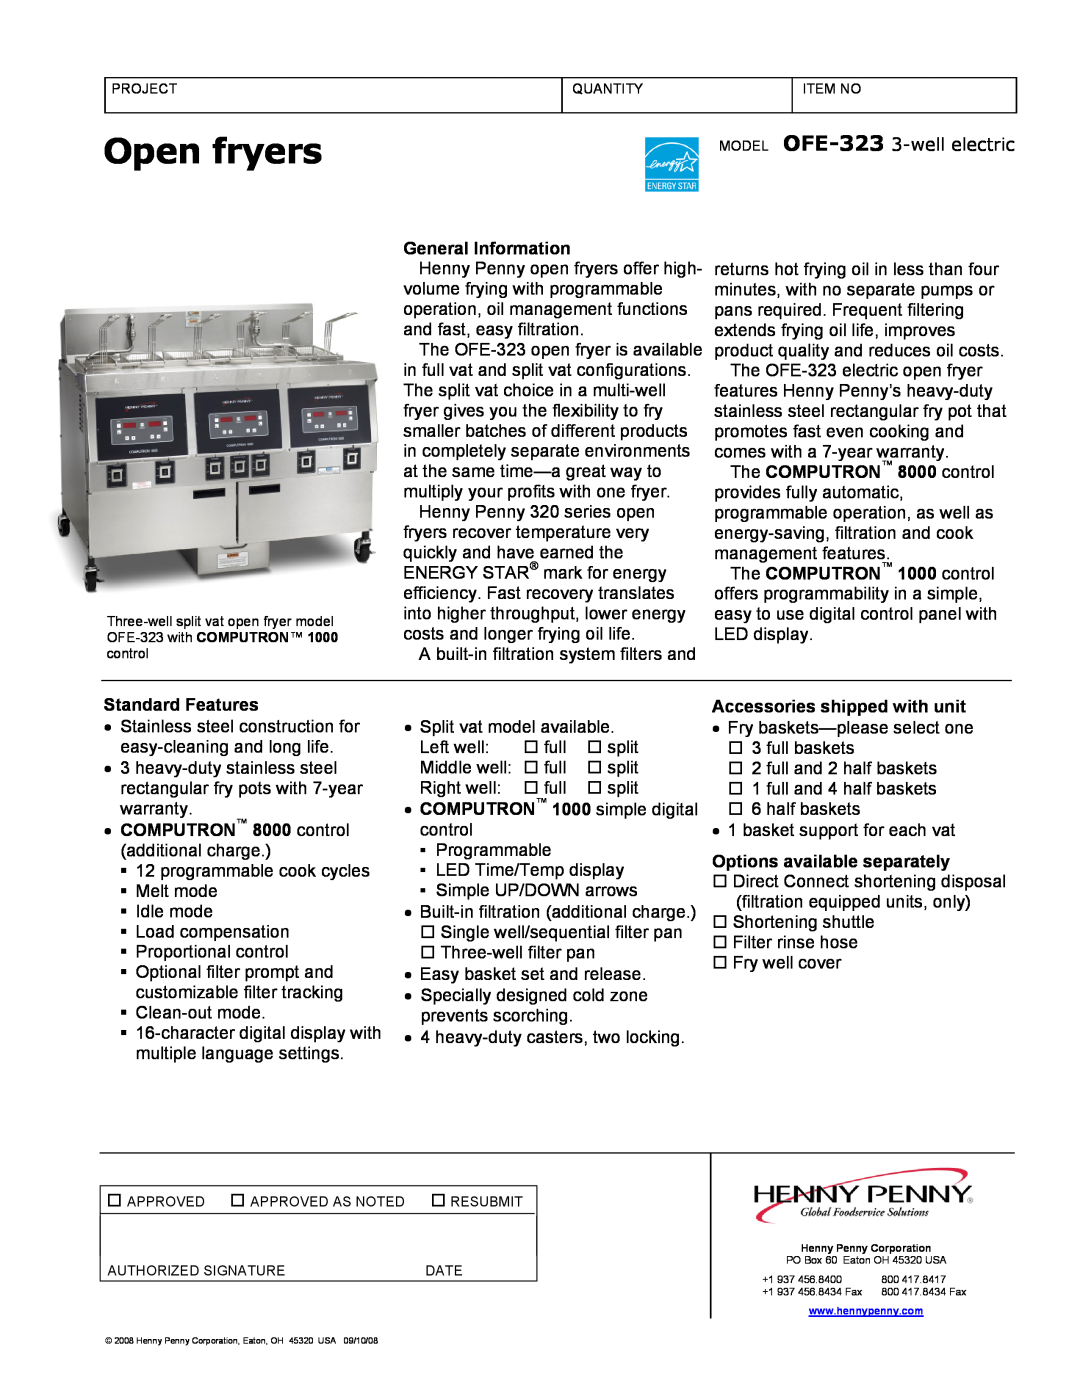 Henny Penny OFE-323 warranty Open fryers, General Information, Standard Features, COMPUTRON 8000 control additional charge 